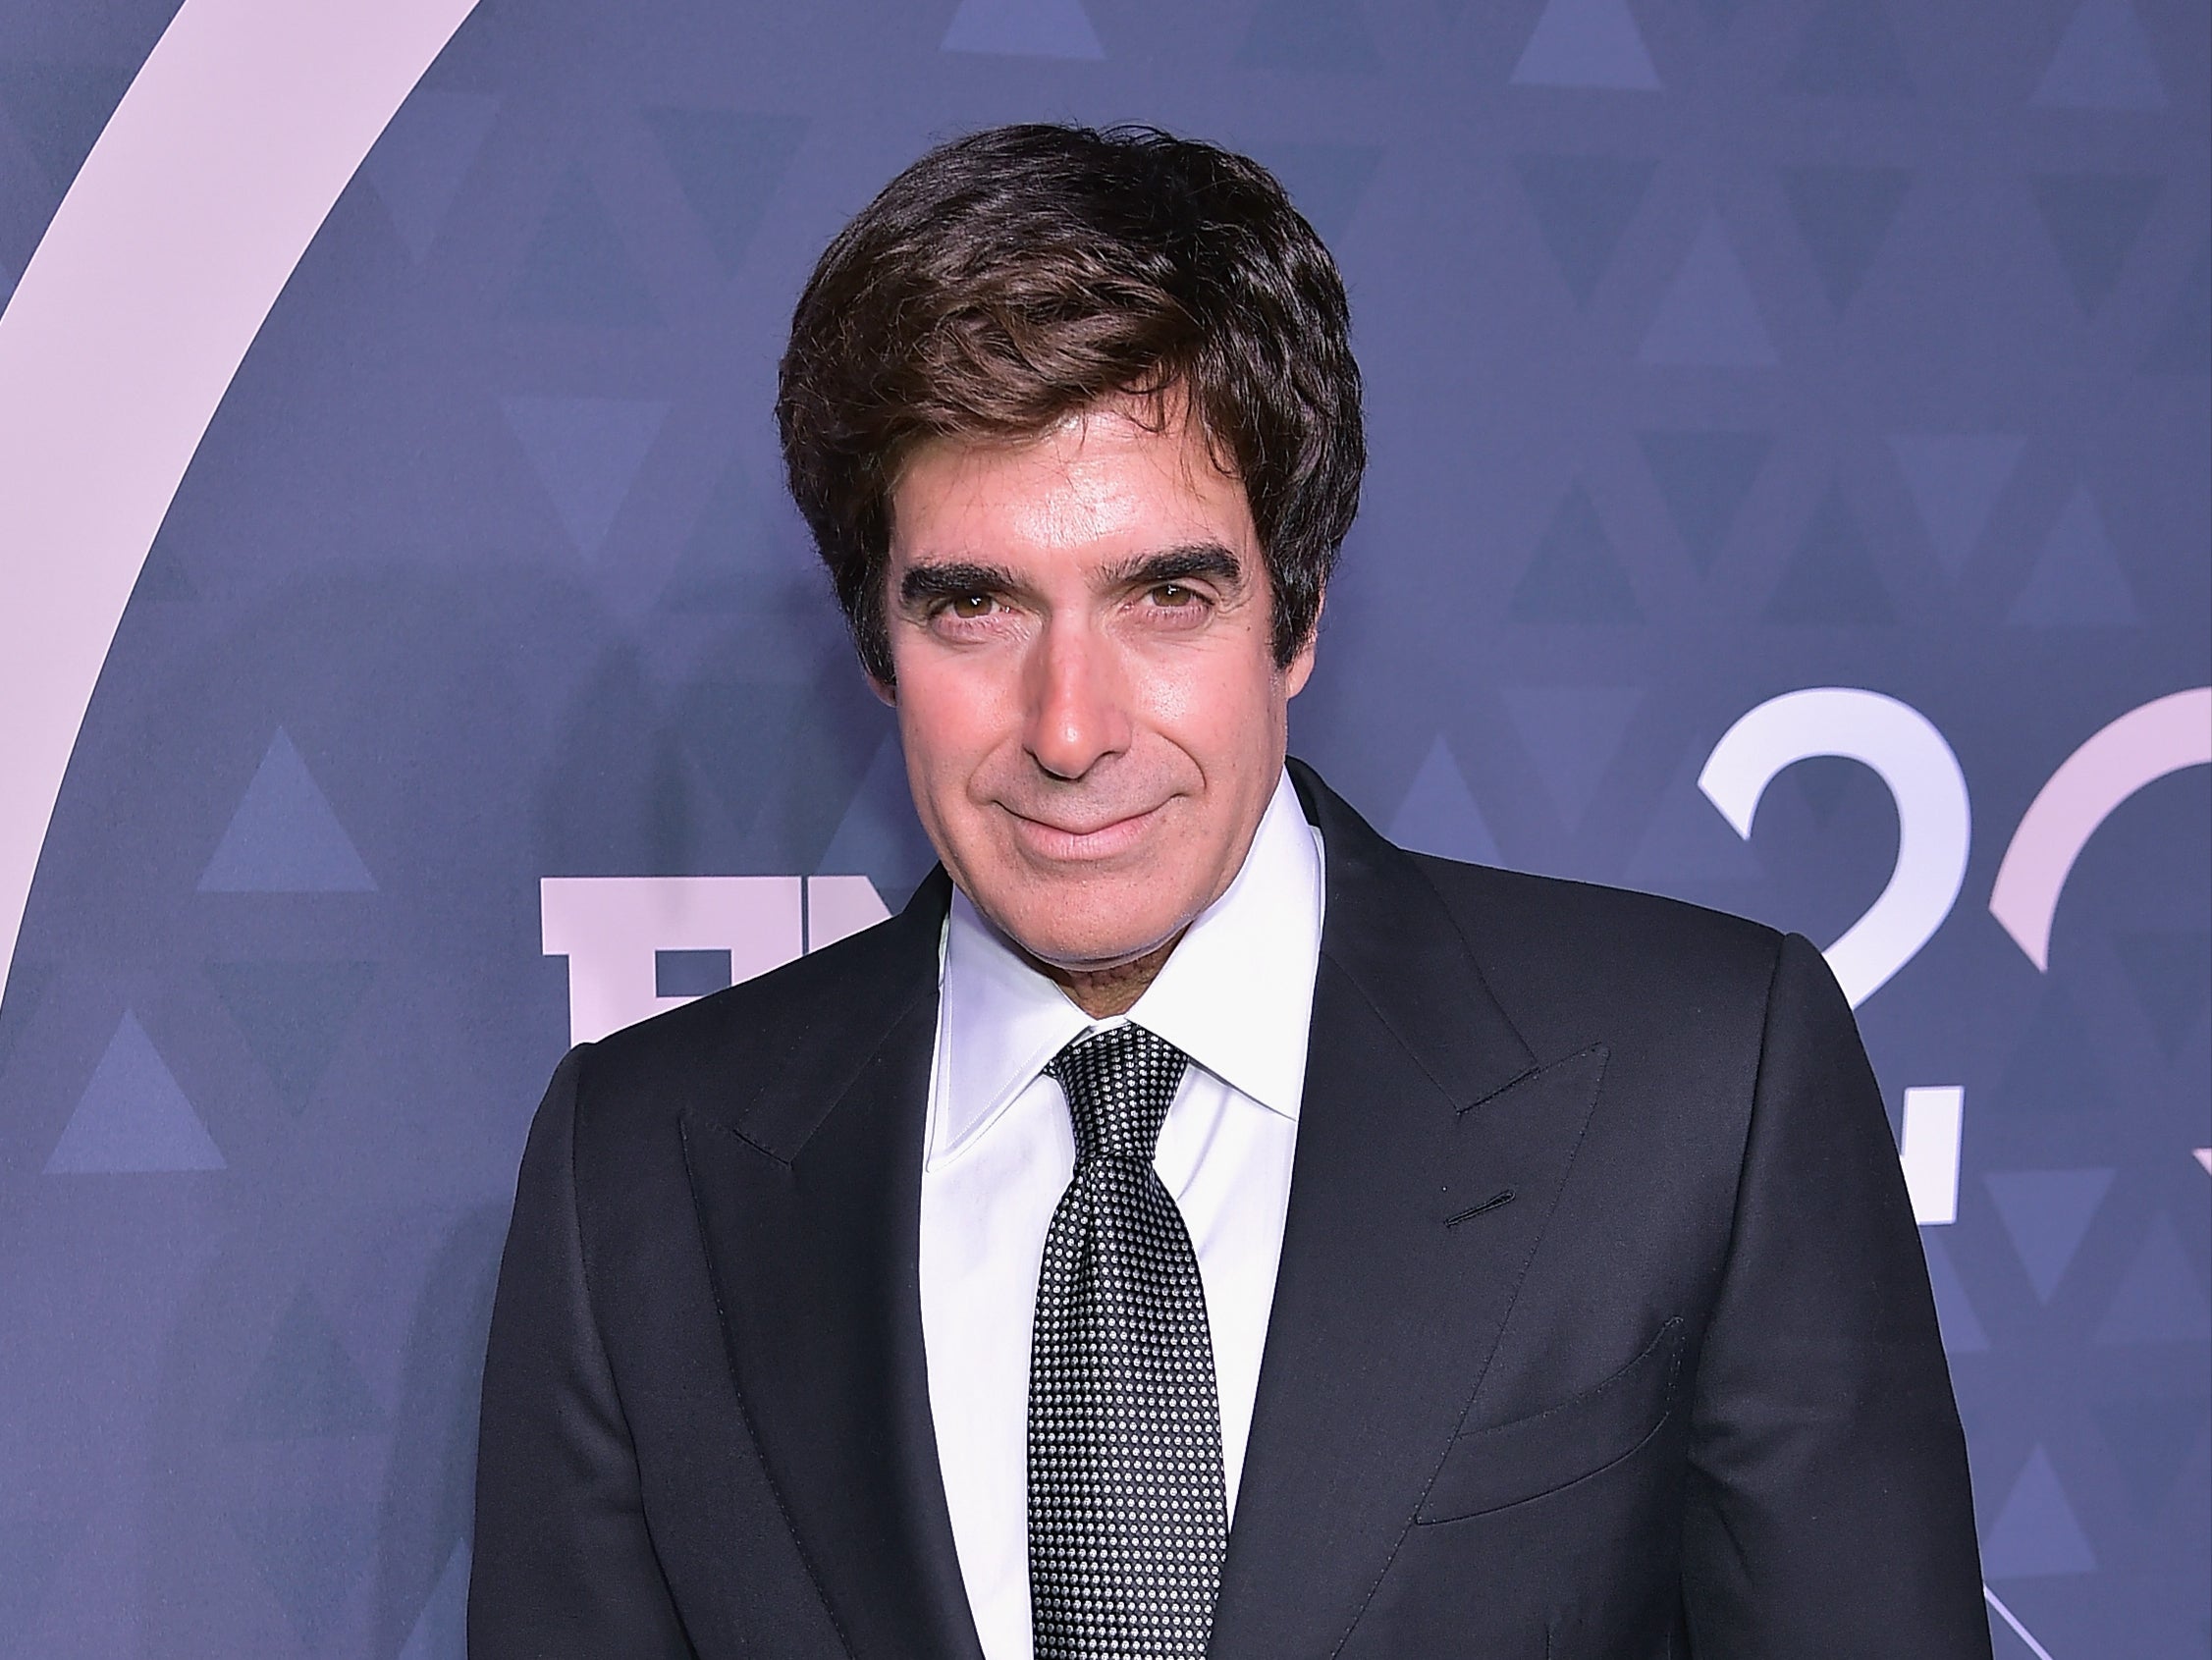 File: Magician David Copperfield attends the 2018 Footwear News Achievement Awards at IAC Headquarters on December 4, 2018 in New York City